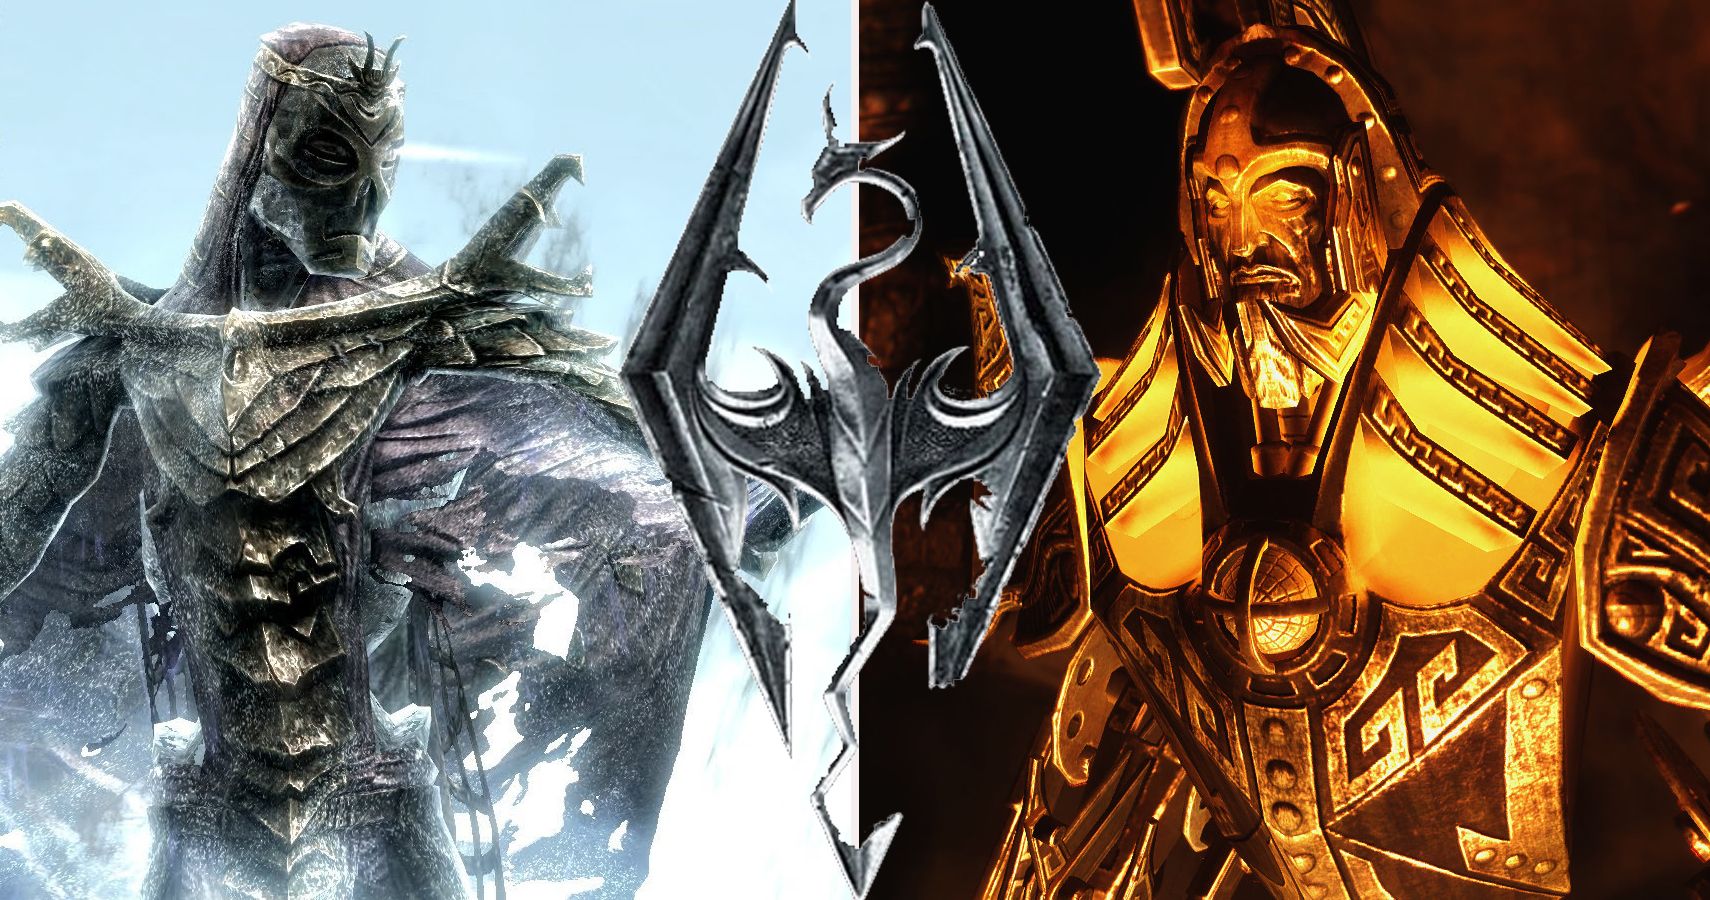 Skyrim: How To Summon And Defeat Karstaag In The Dragonborn DLC